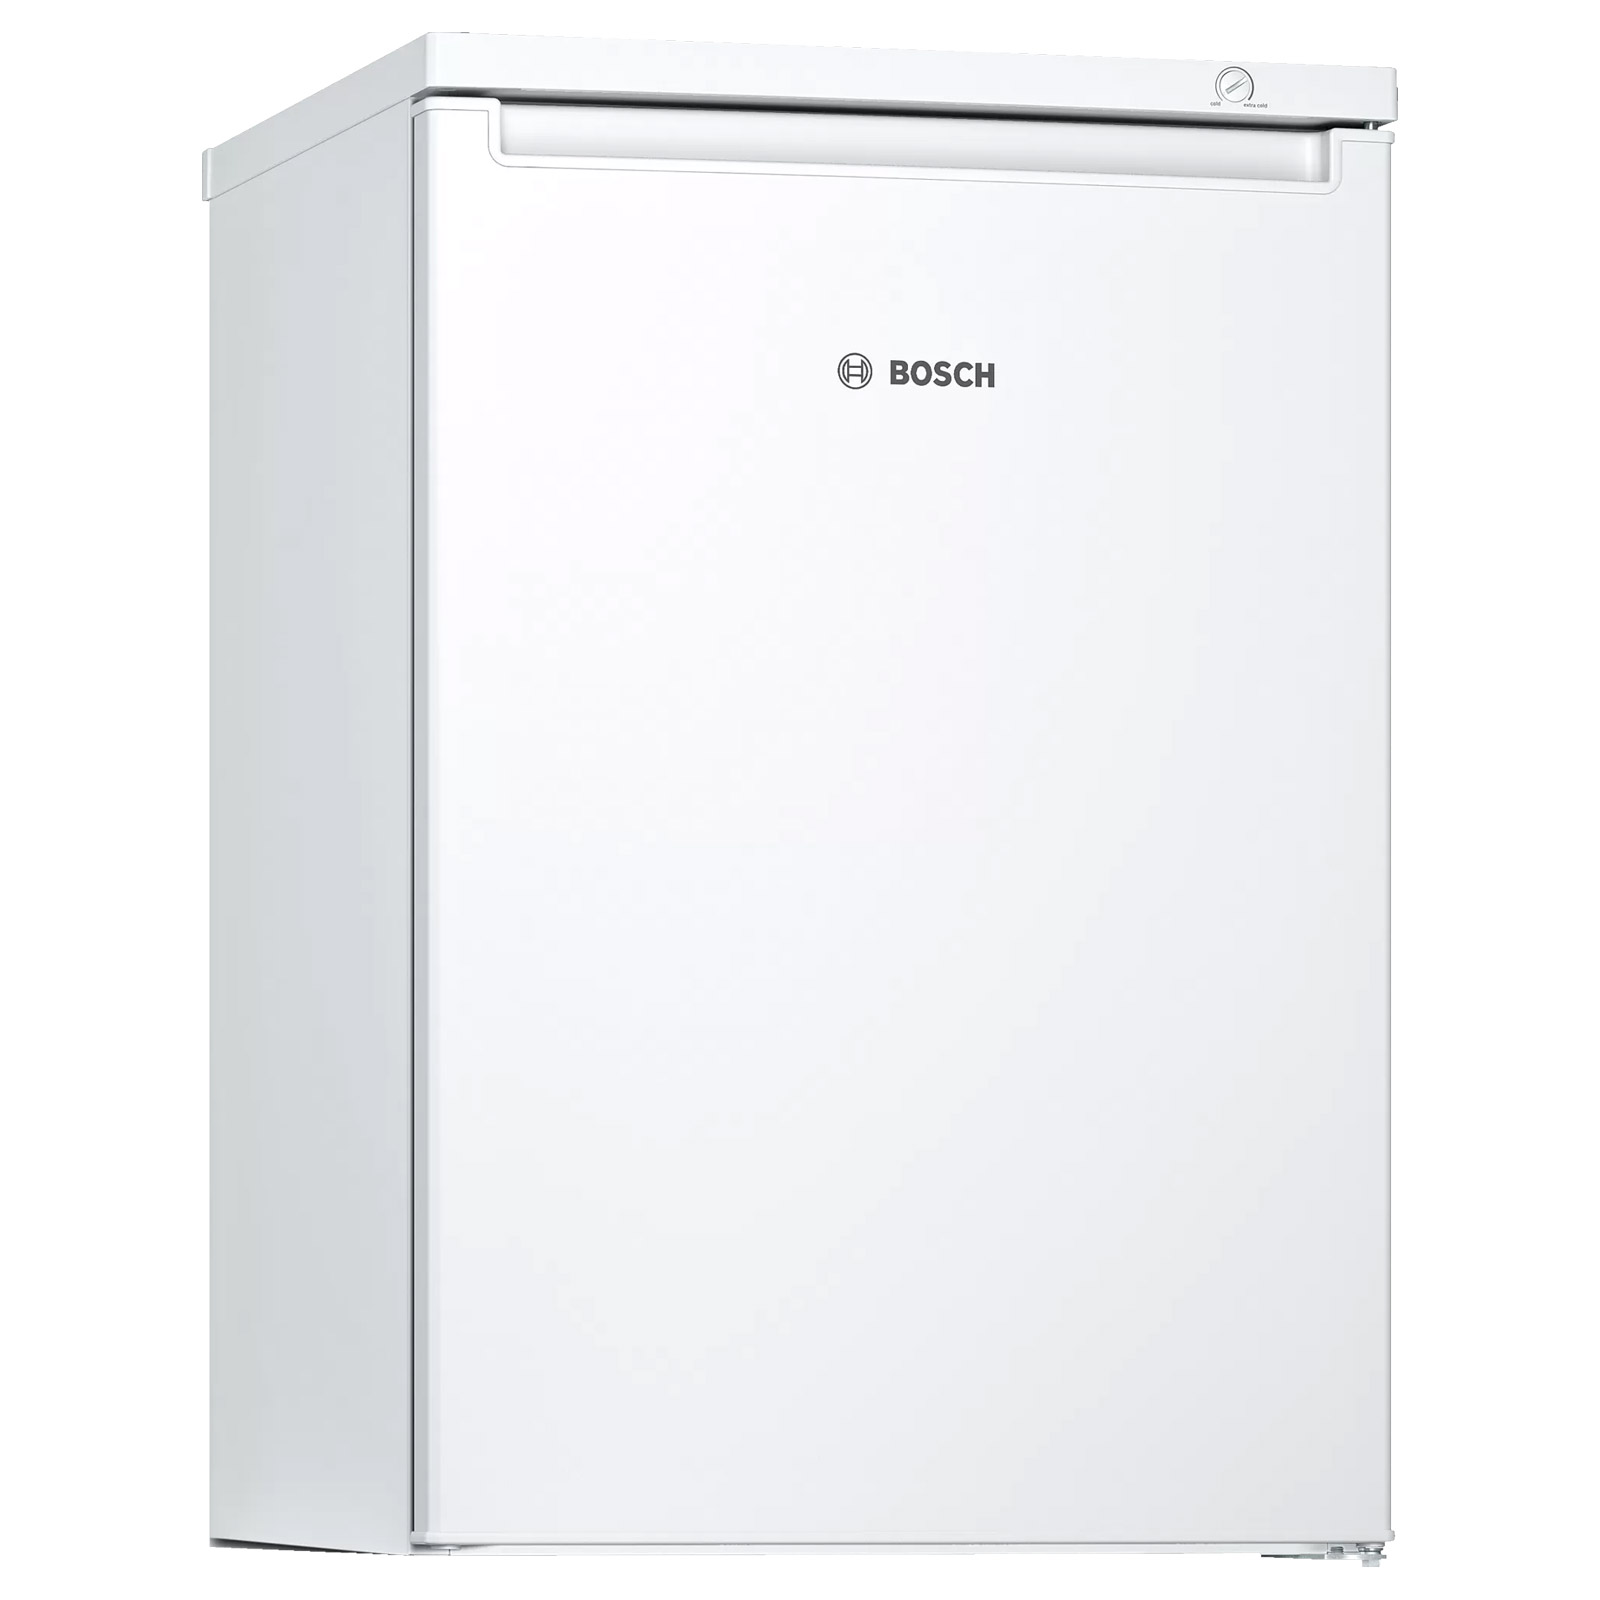 Image of Bosch GTV15NWEAG Series 2 56cm Undercounter Freezer in White E Rated